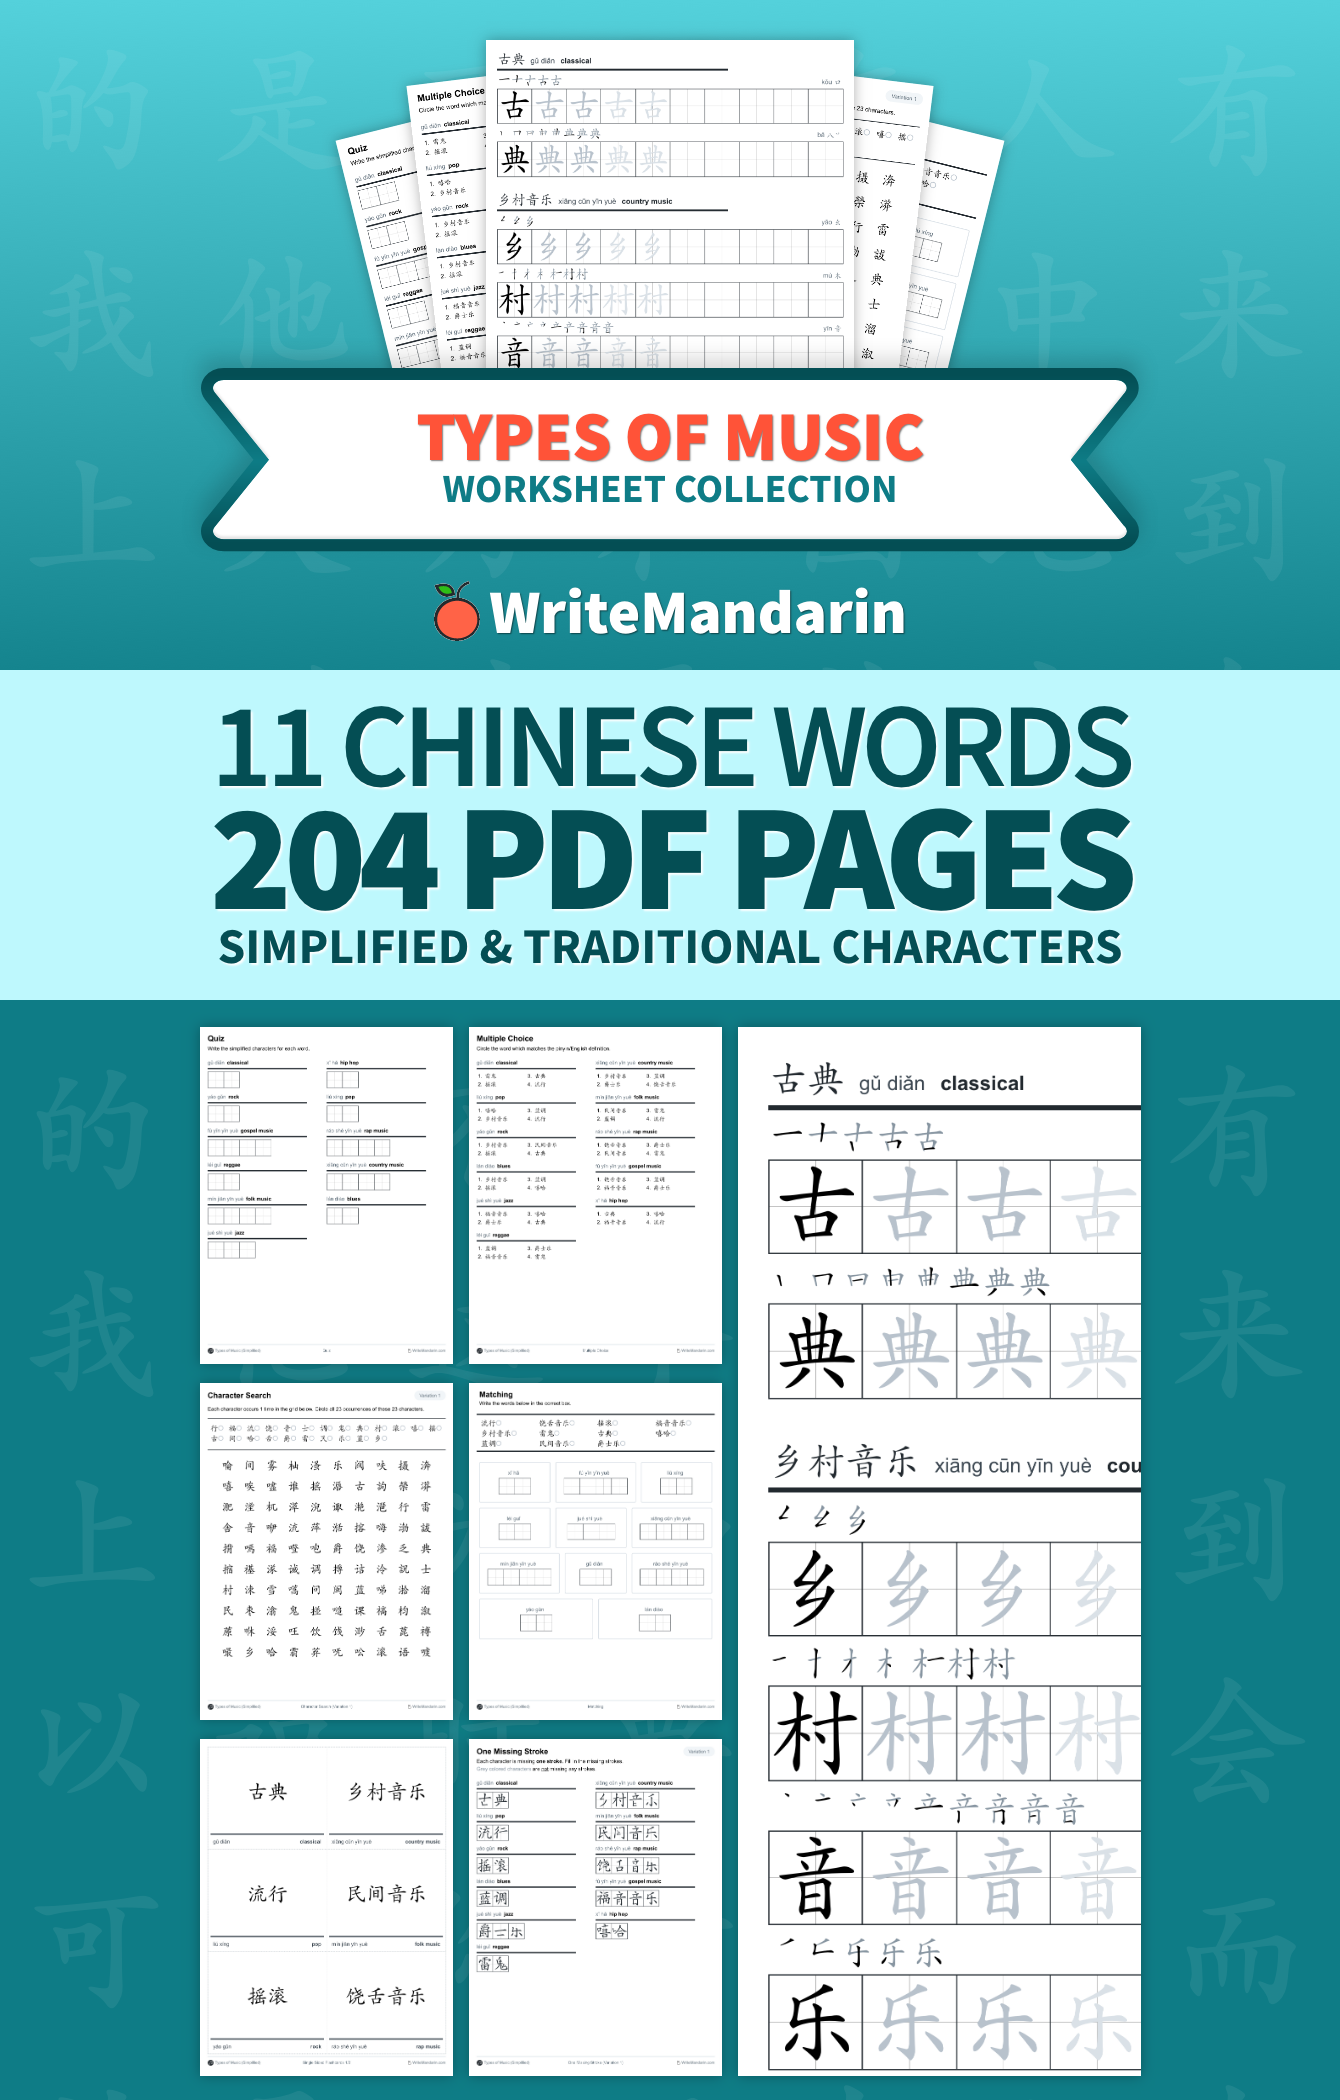 Preview image of Types of Music worksheet collection